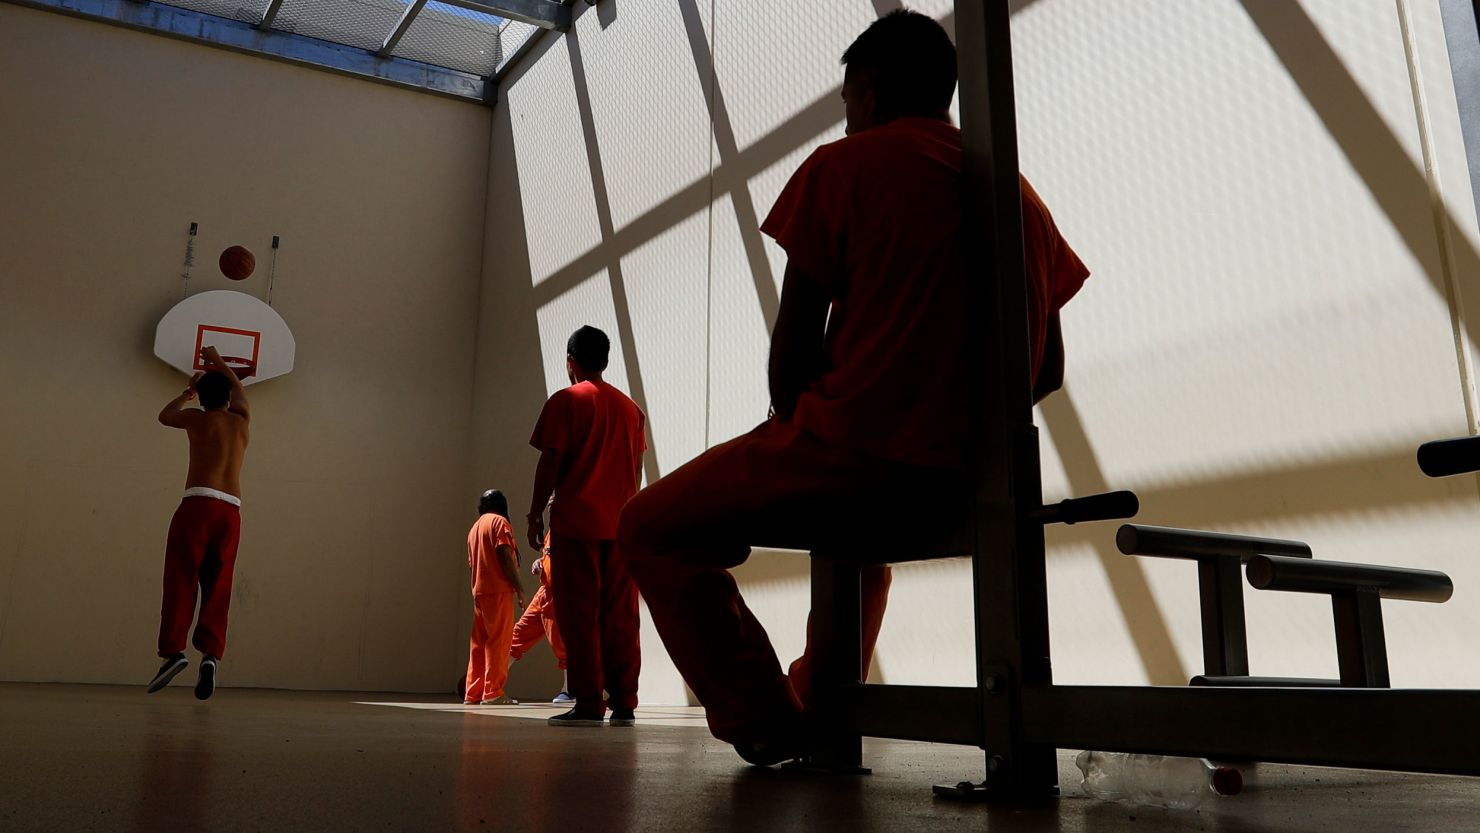 Detainees exercise at the Adelanto ICE processing center in Adelanto, California., in 2019.